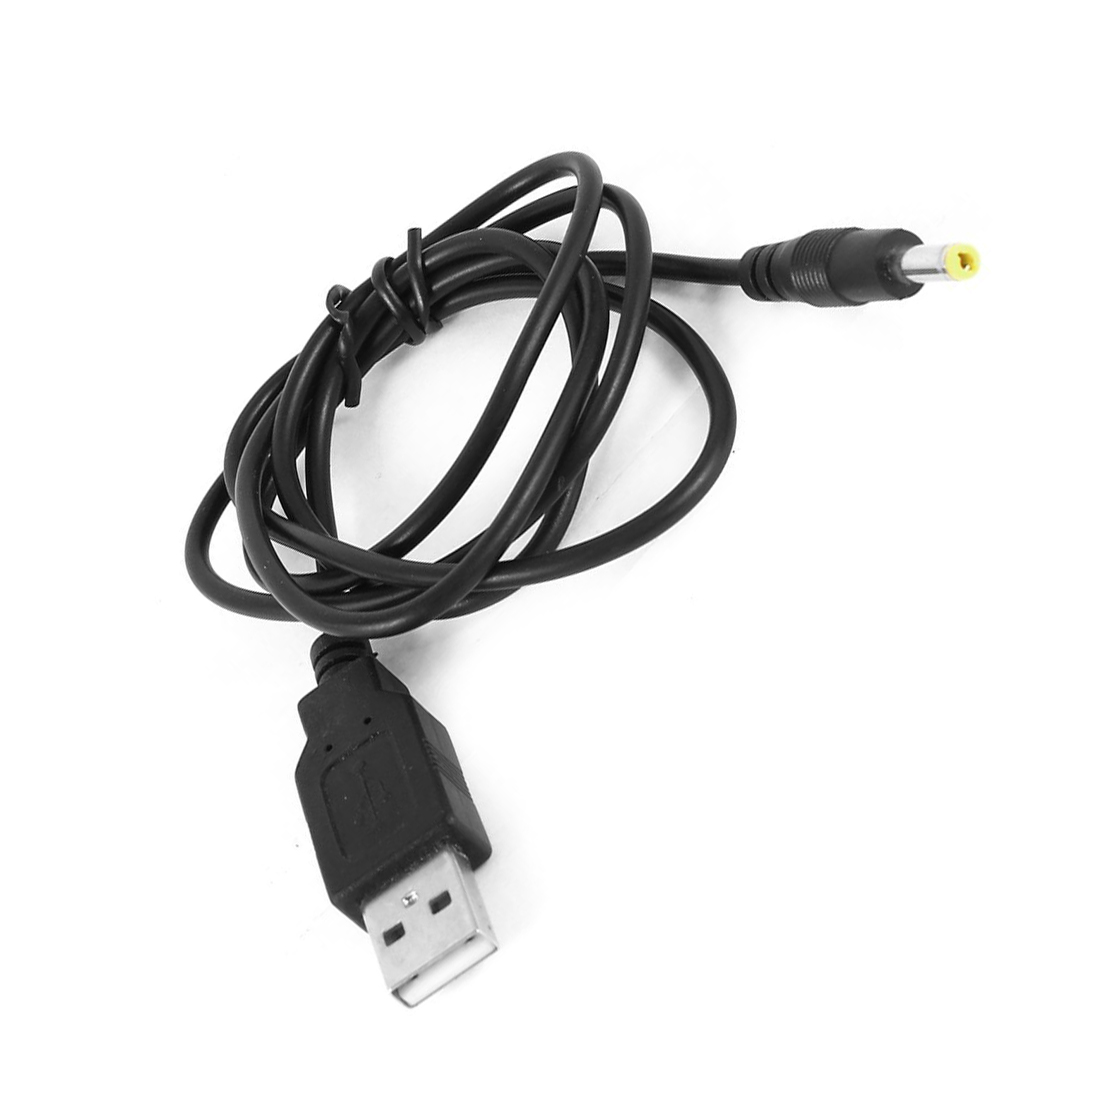 High Speed USB 2.0 A Male to DC 4.0mm x 1.7mm Power Cable 3Ft Black
